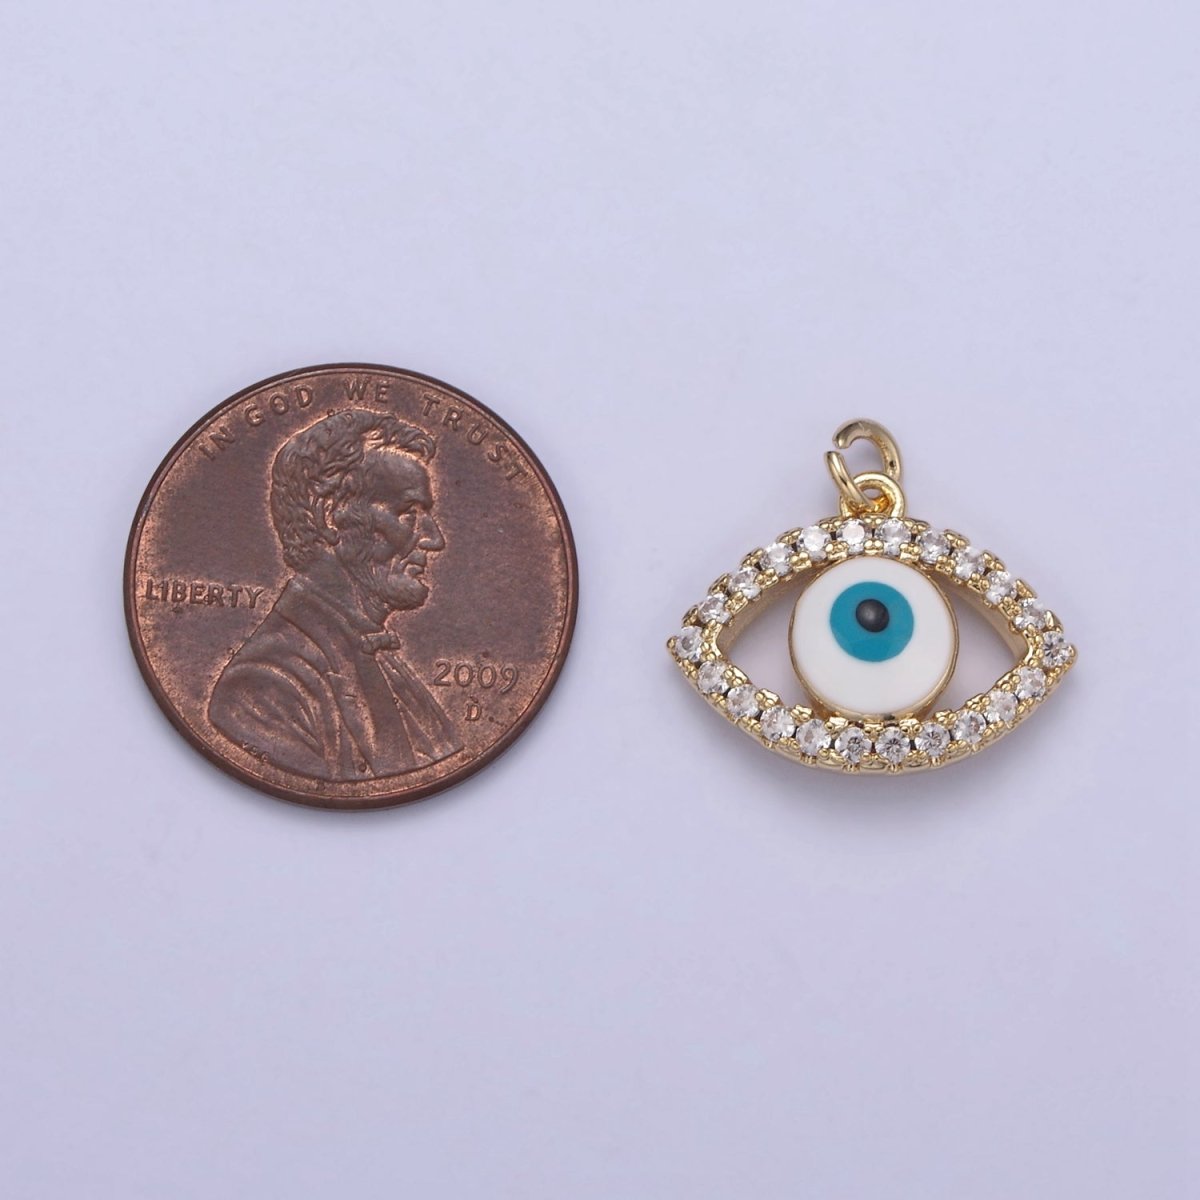 18K Gold Filled Evil Eye Gold Charm Cubic Zirconia Cz Eye Charm Dainty Good Luck and Protection Charm N-358 - DLUXCA